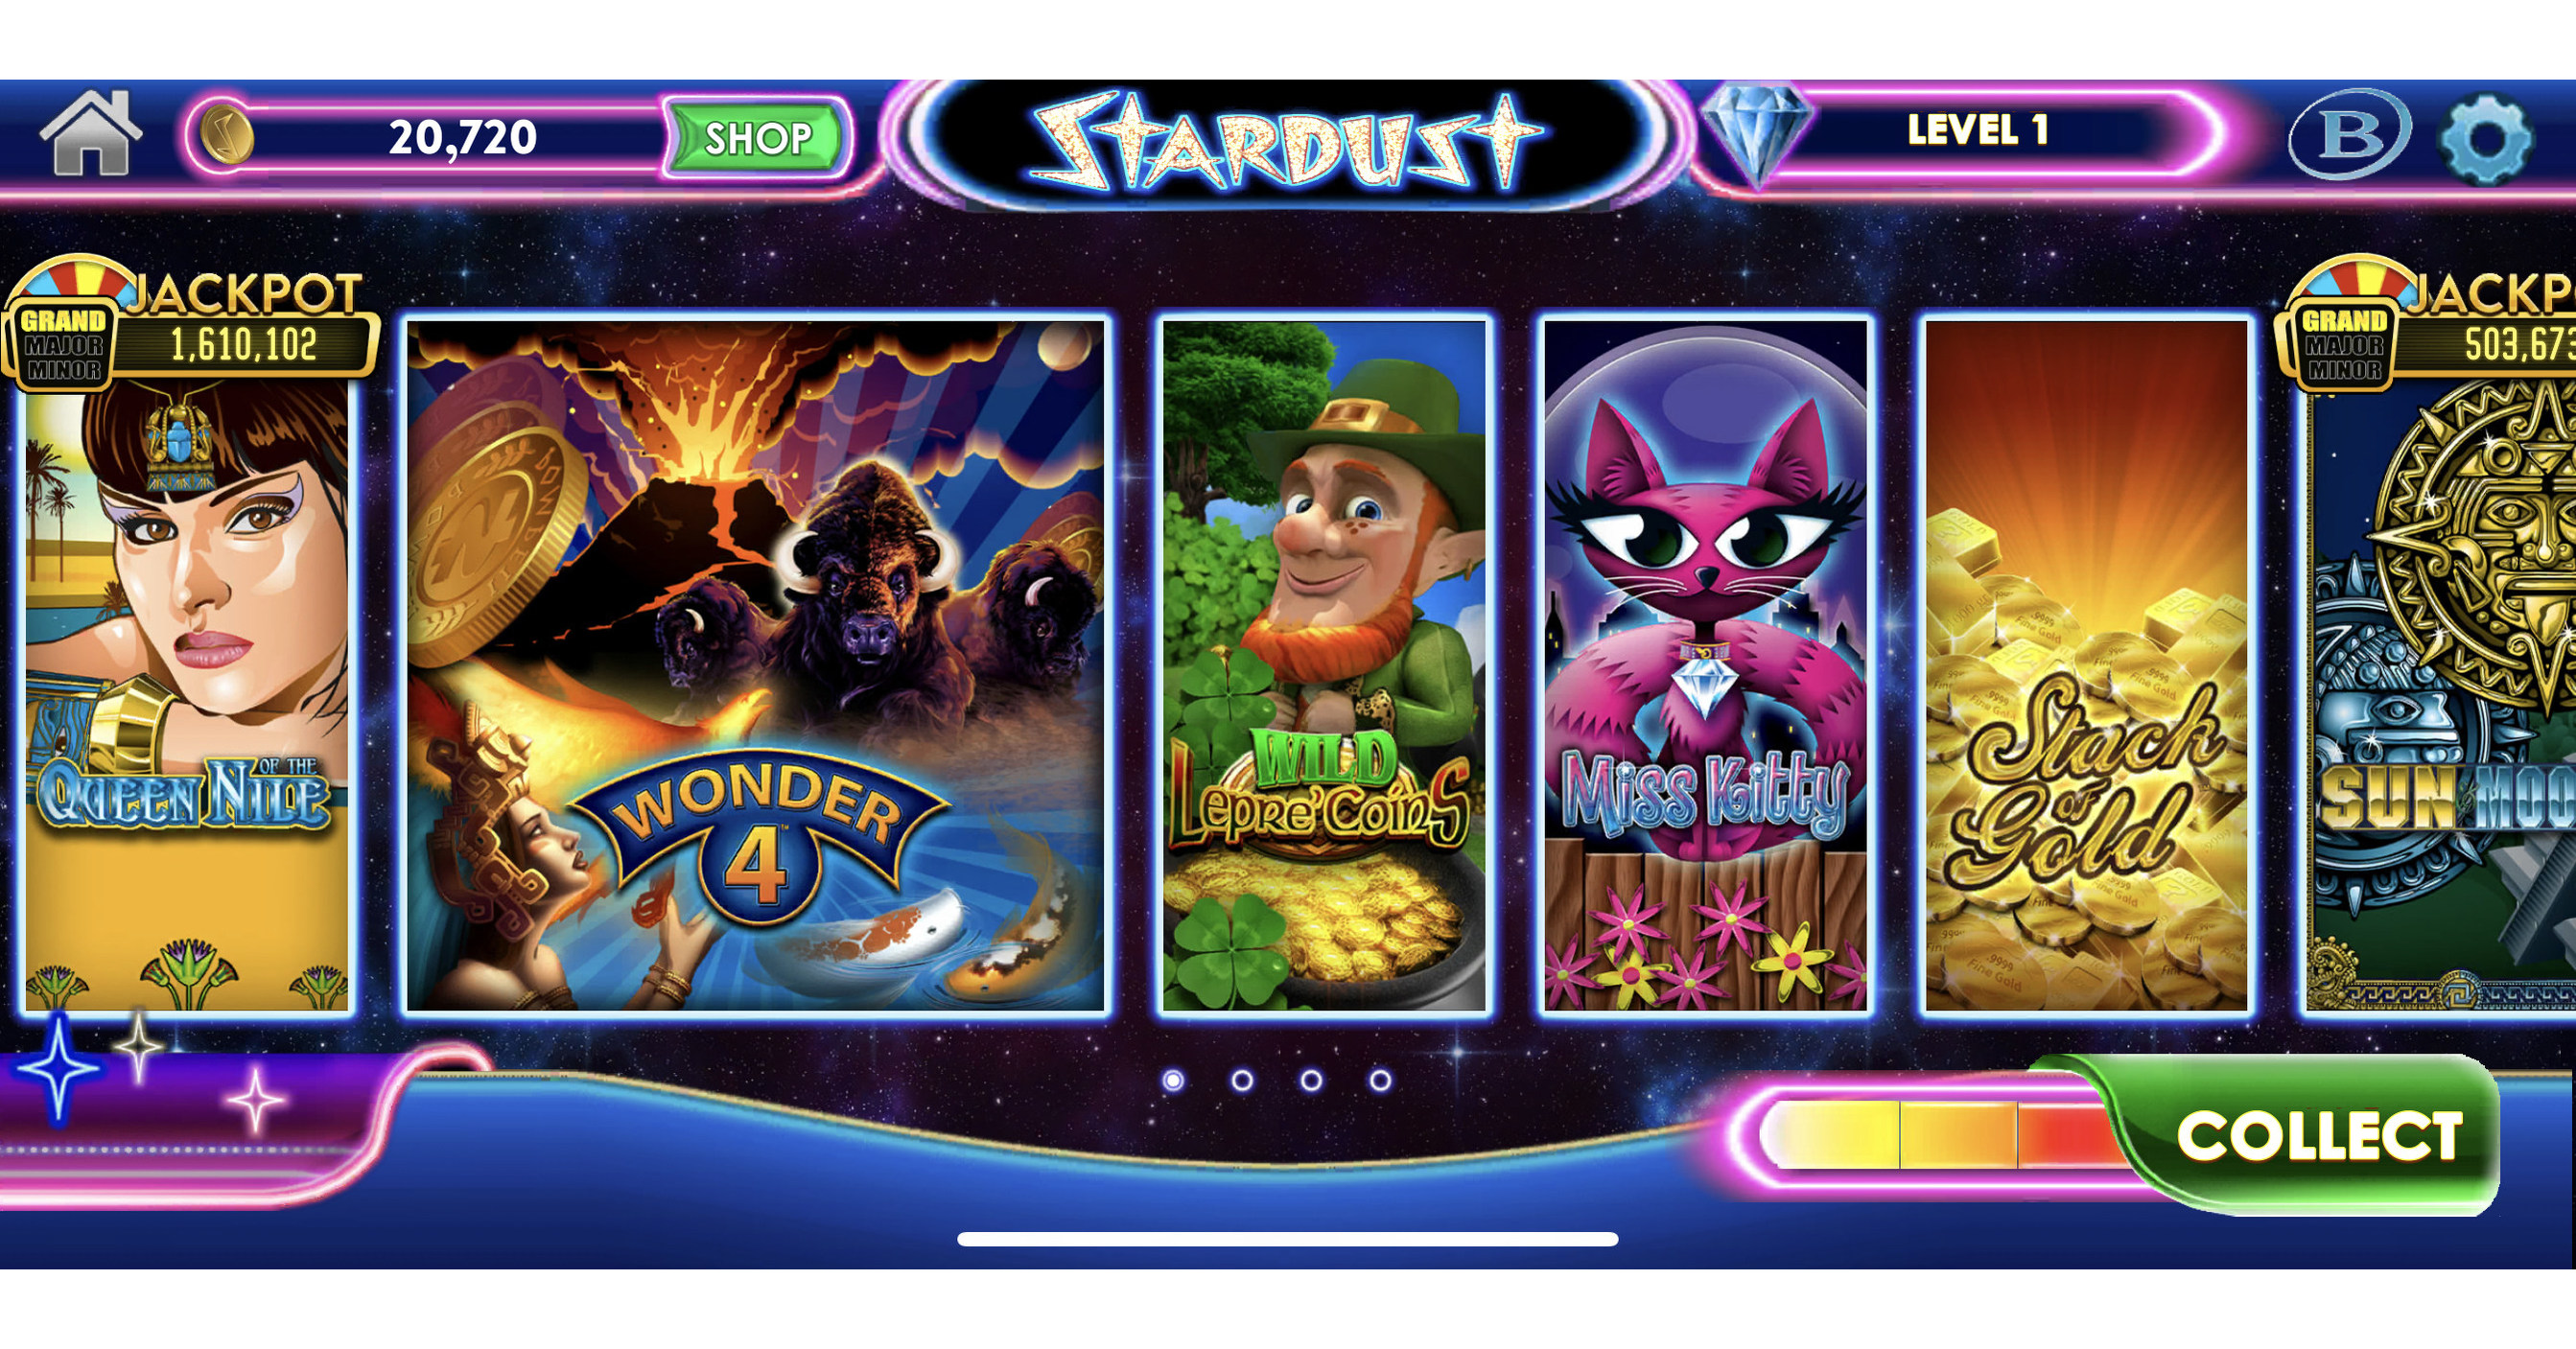 Boyd Gaming Launches Stardust Social Casino